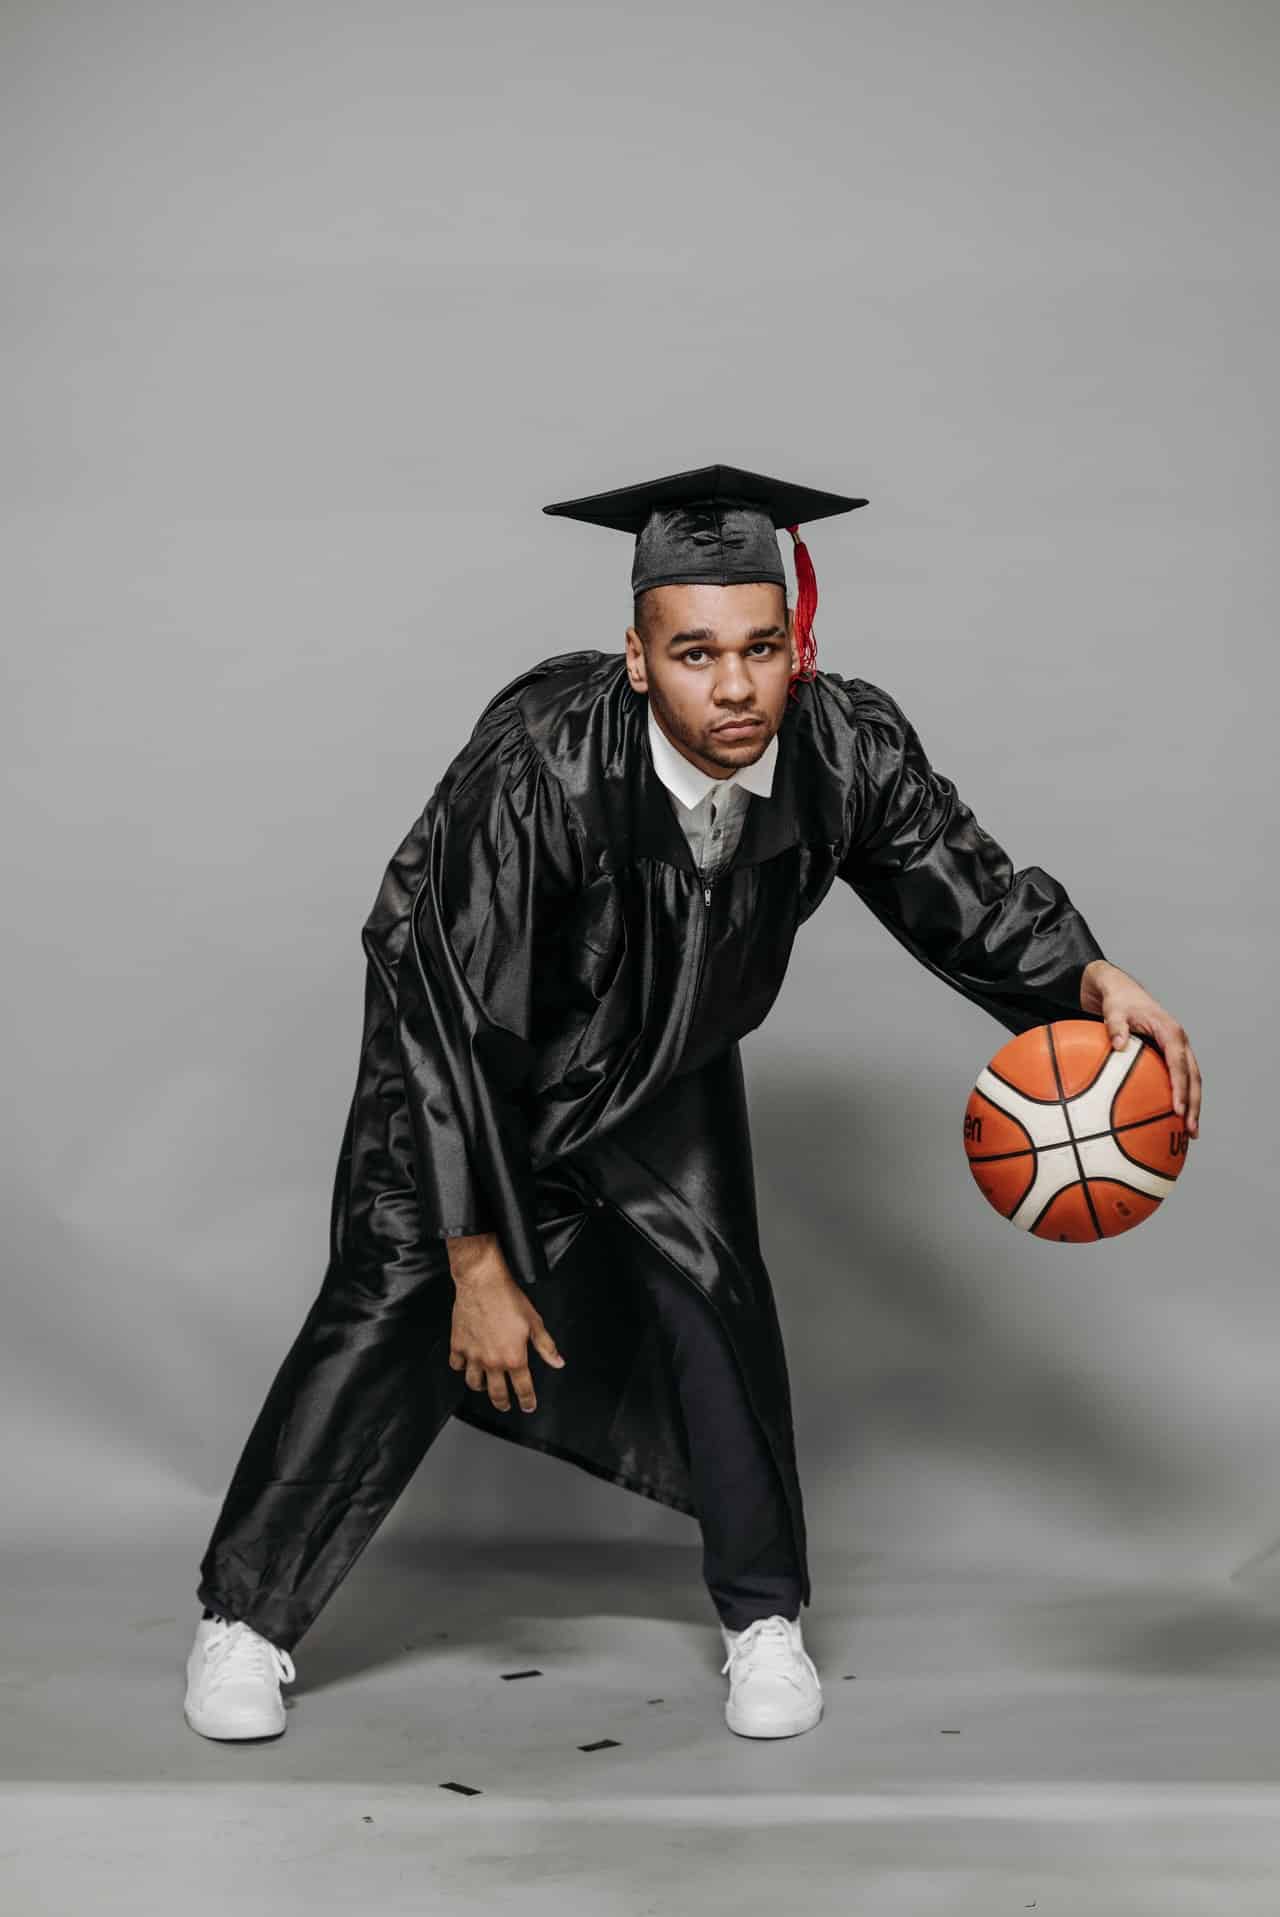 Guys Senior Graduation Portraits Style Guide - Laura Leigh Images